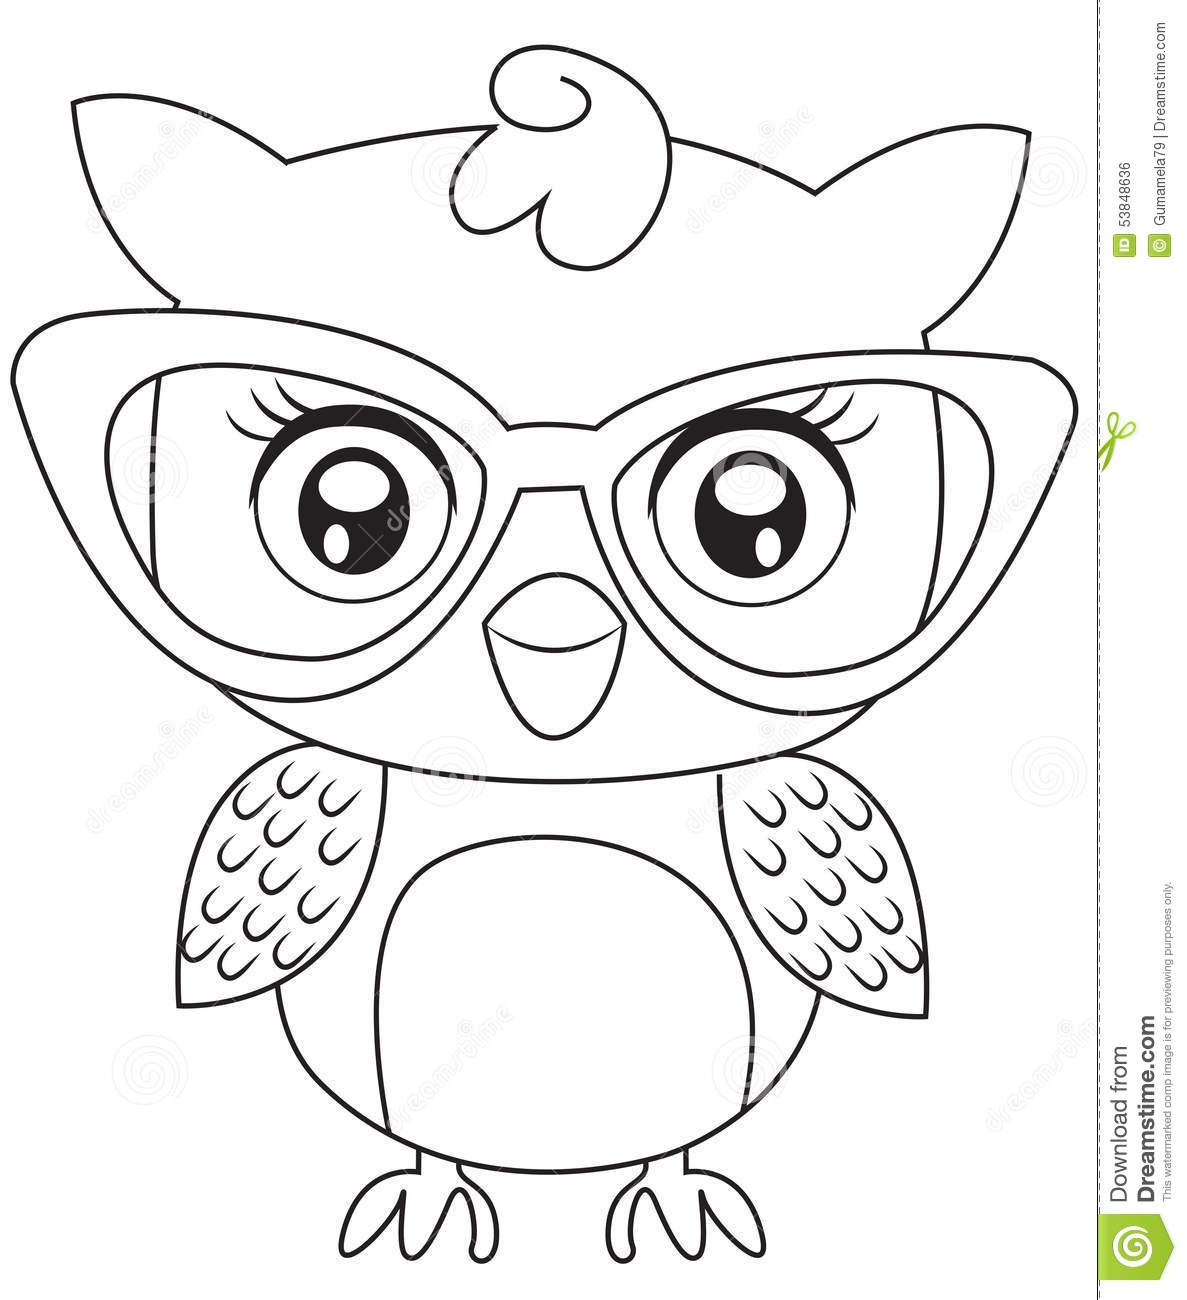 Owl Coloring Pages For Girls
 Owl With Eyeglasses Coloring Page Stock Illustration